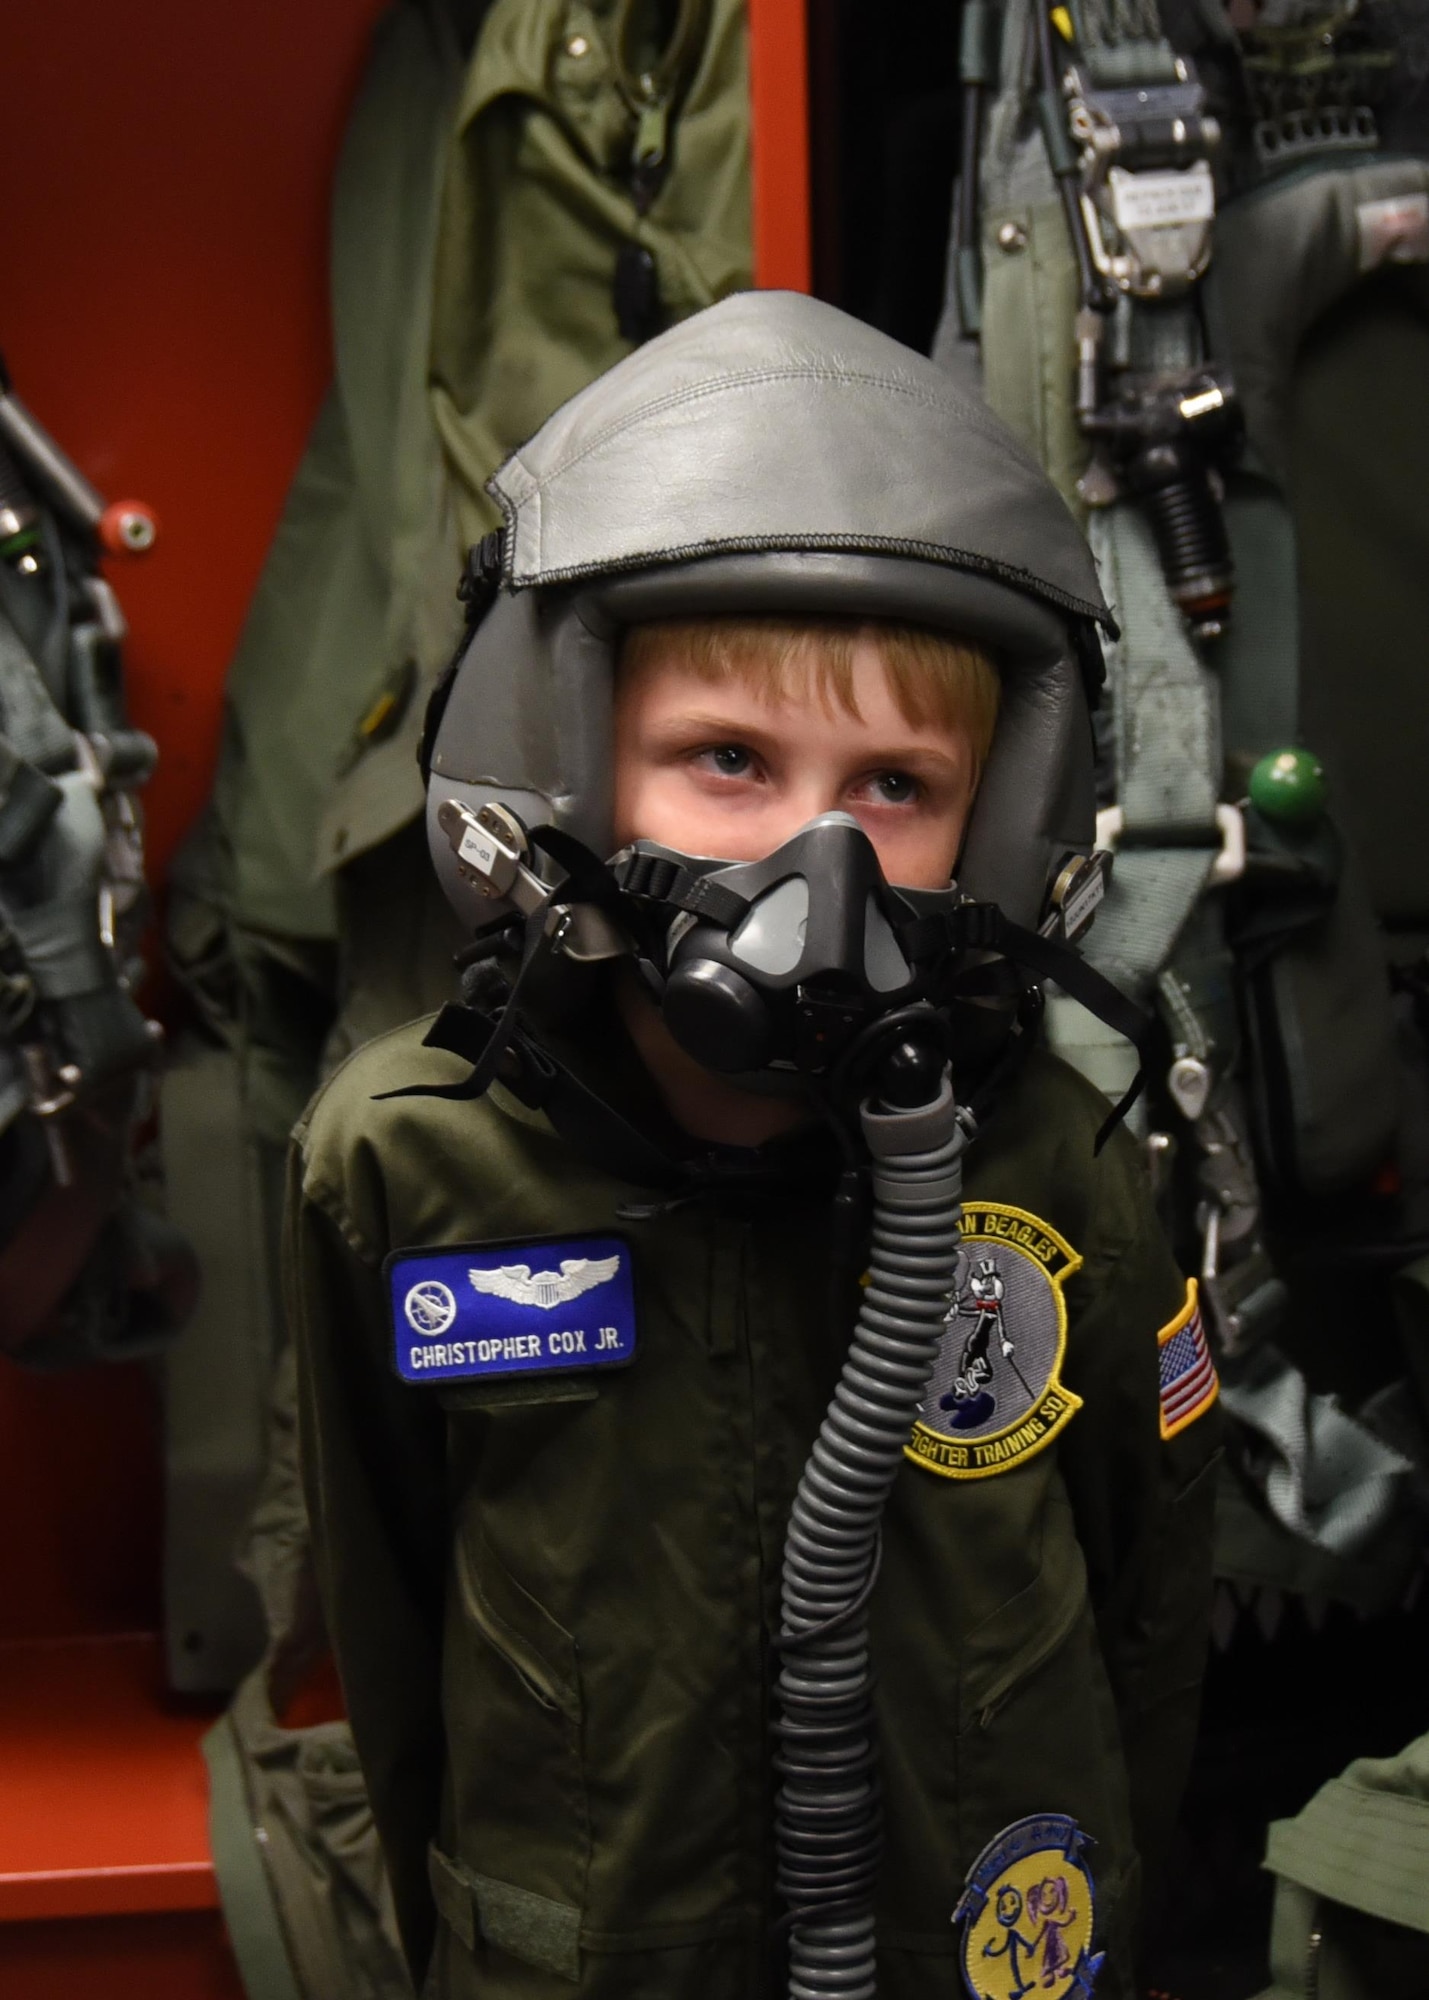 Honorary pilot Christopher Cox dawns flight equipment from the 2nd Fighter Training Squadron at Tyndall Air Force Base, Fla., April 21, 2017. Cox had the opportunity to tour base facilities, watch air show rehearsal performances, and have a meet and greet with the U.S. Air Force Air Demonstration Squadron Thunderbirds. (U.S. Air Force photo by Airman 1st Class Isaiah J. Soliz/Released)